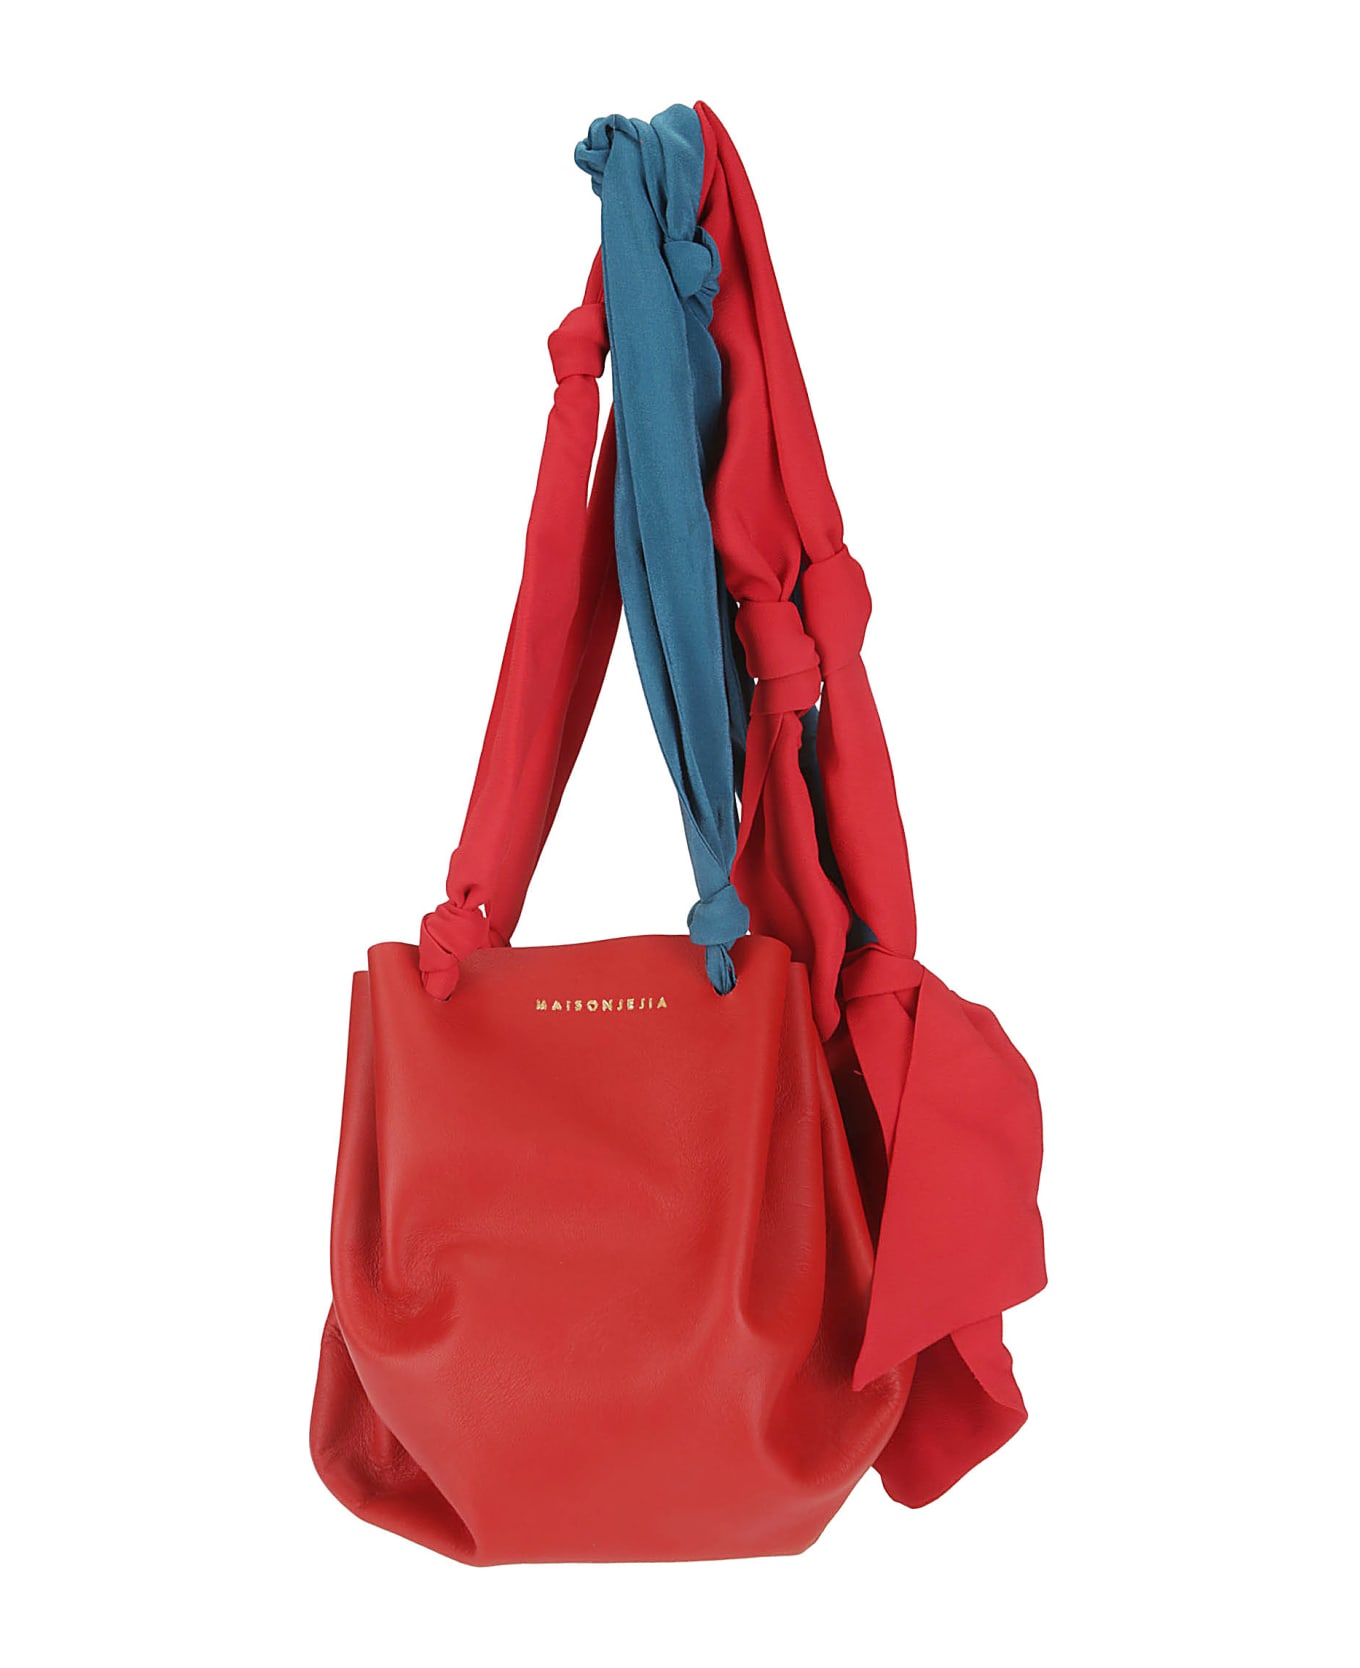 Jejia Bloom Baby Bag - RED LEATHER A1COTTON SILK トートバッグ